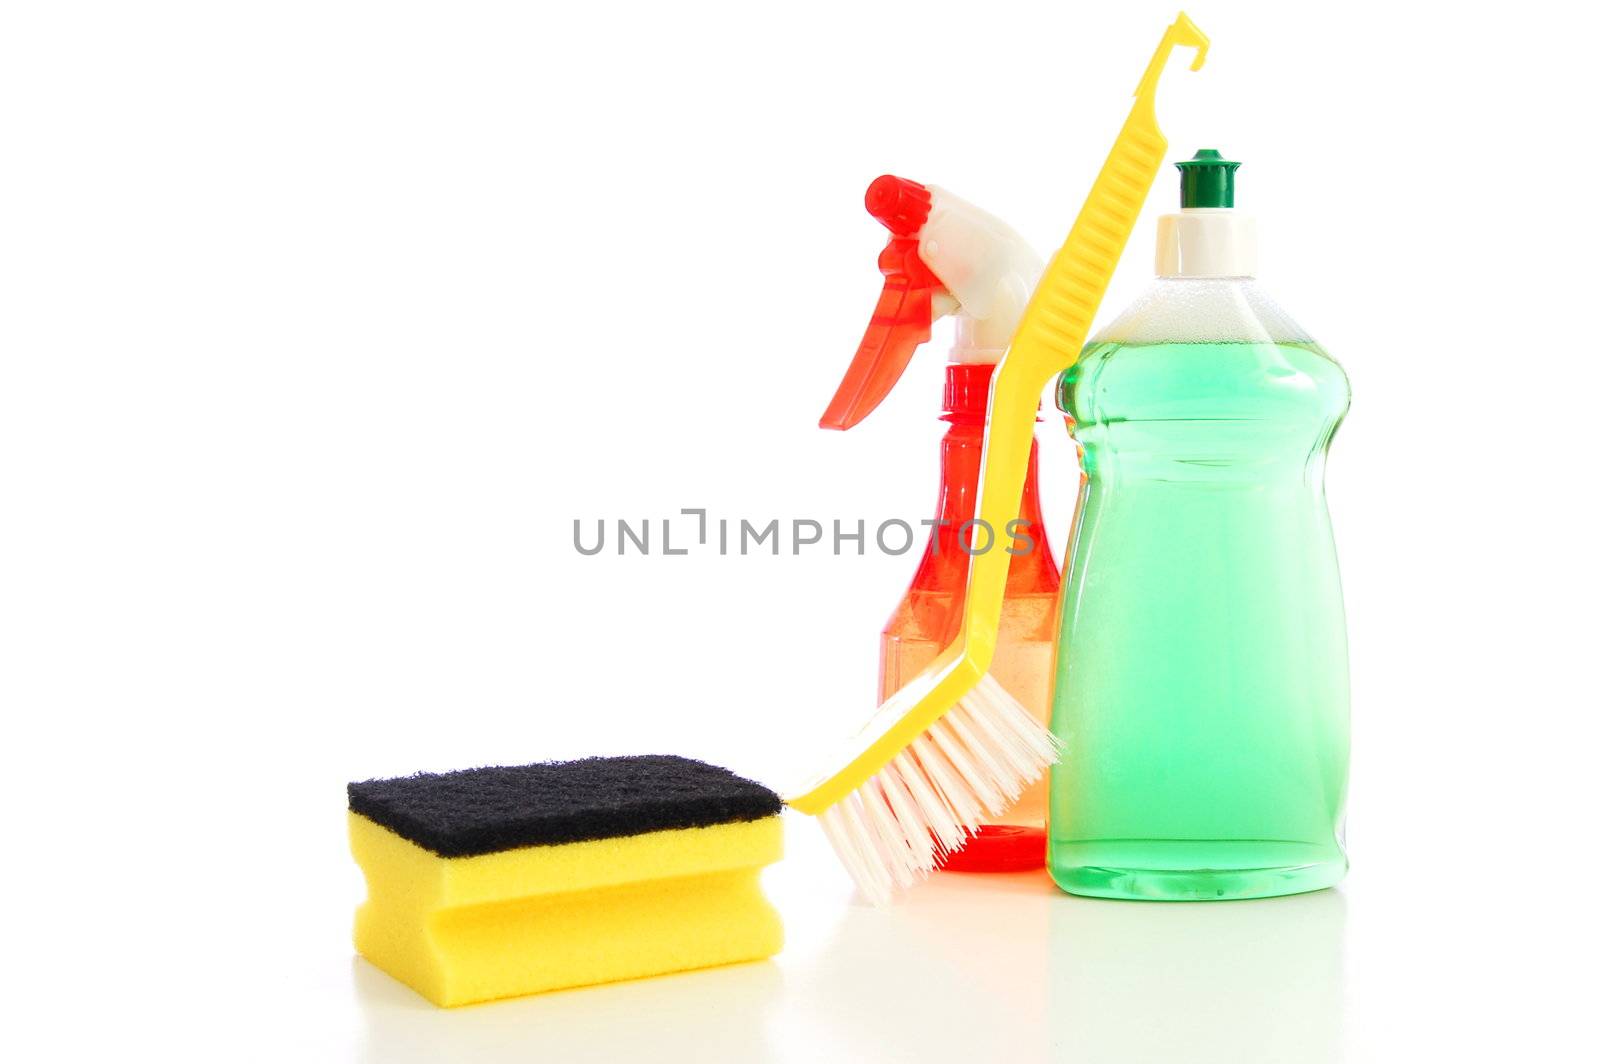 cleaning equipment by gunnar3000